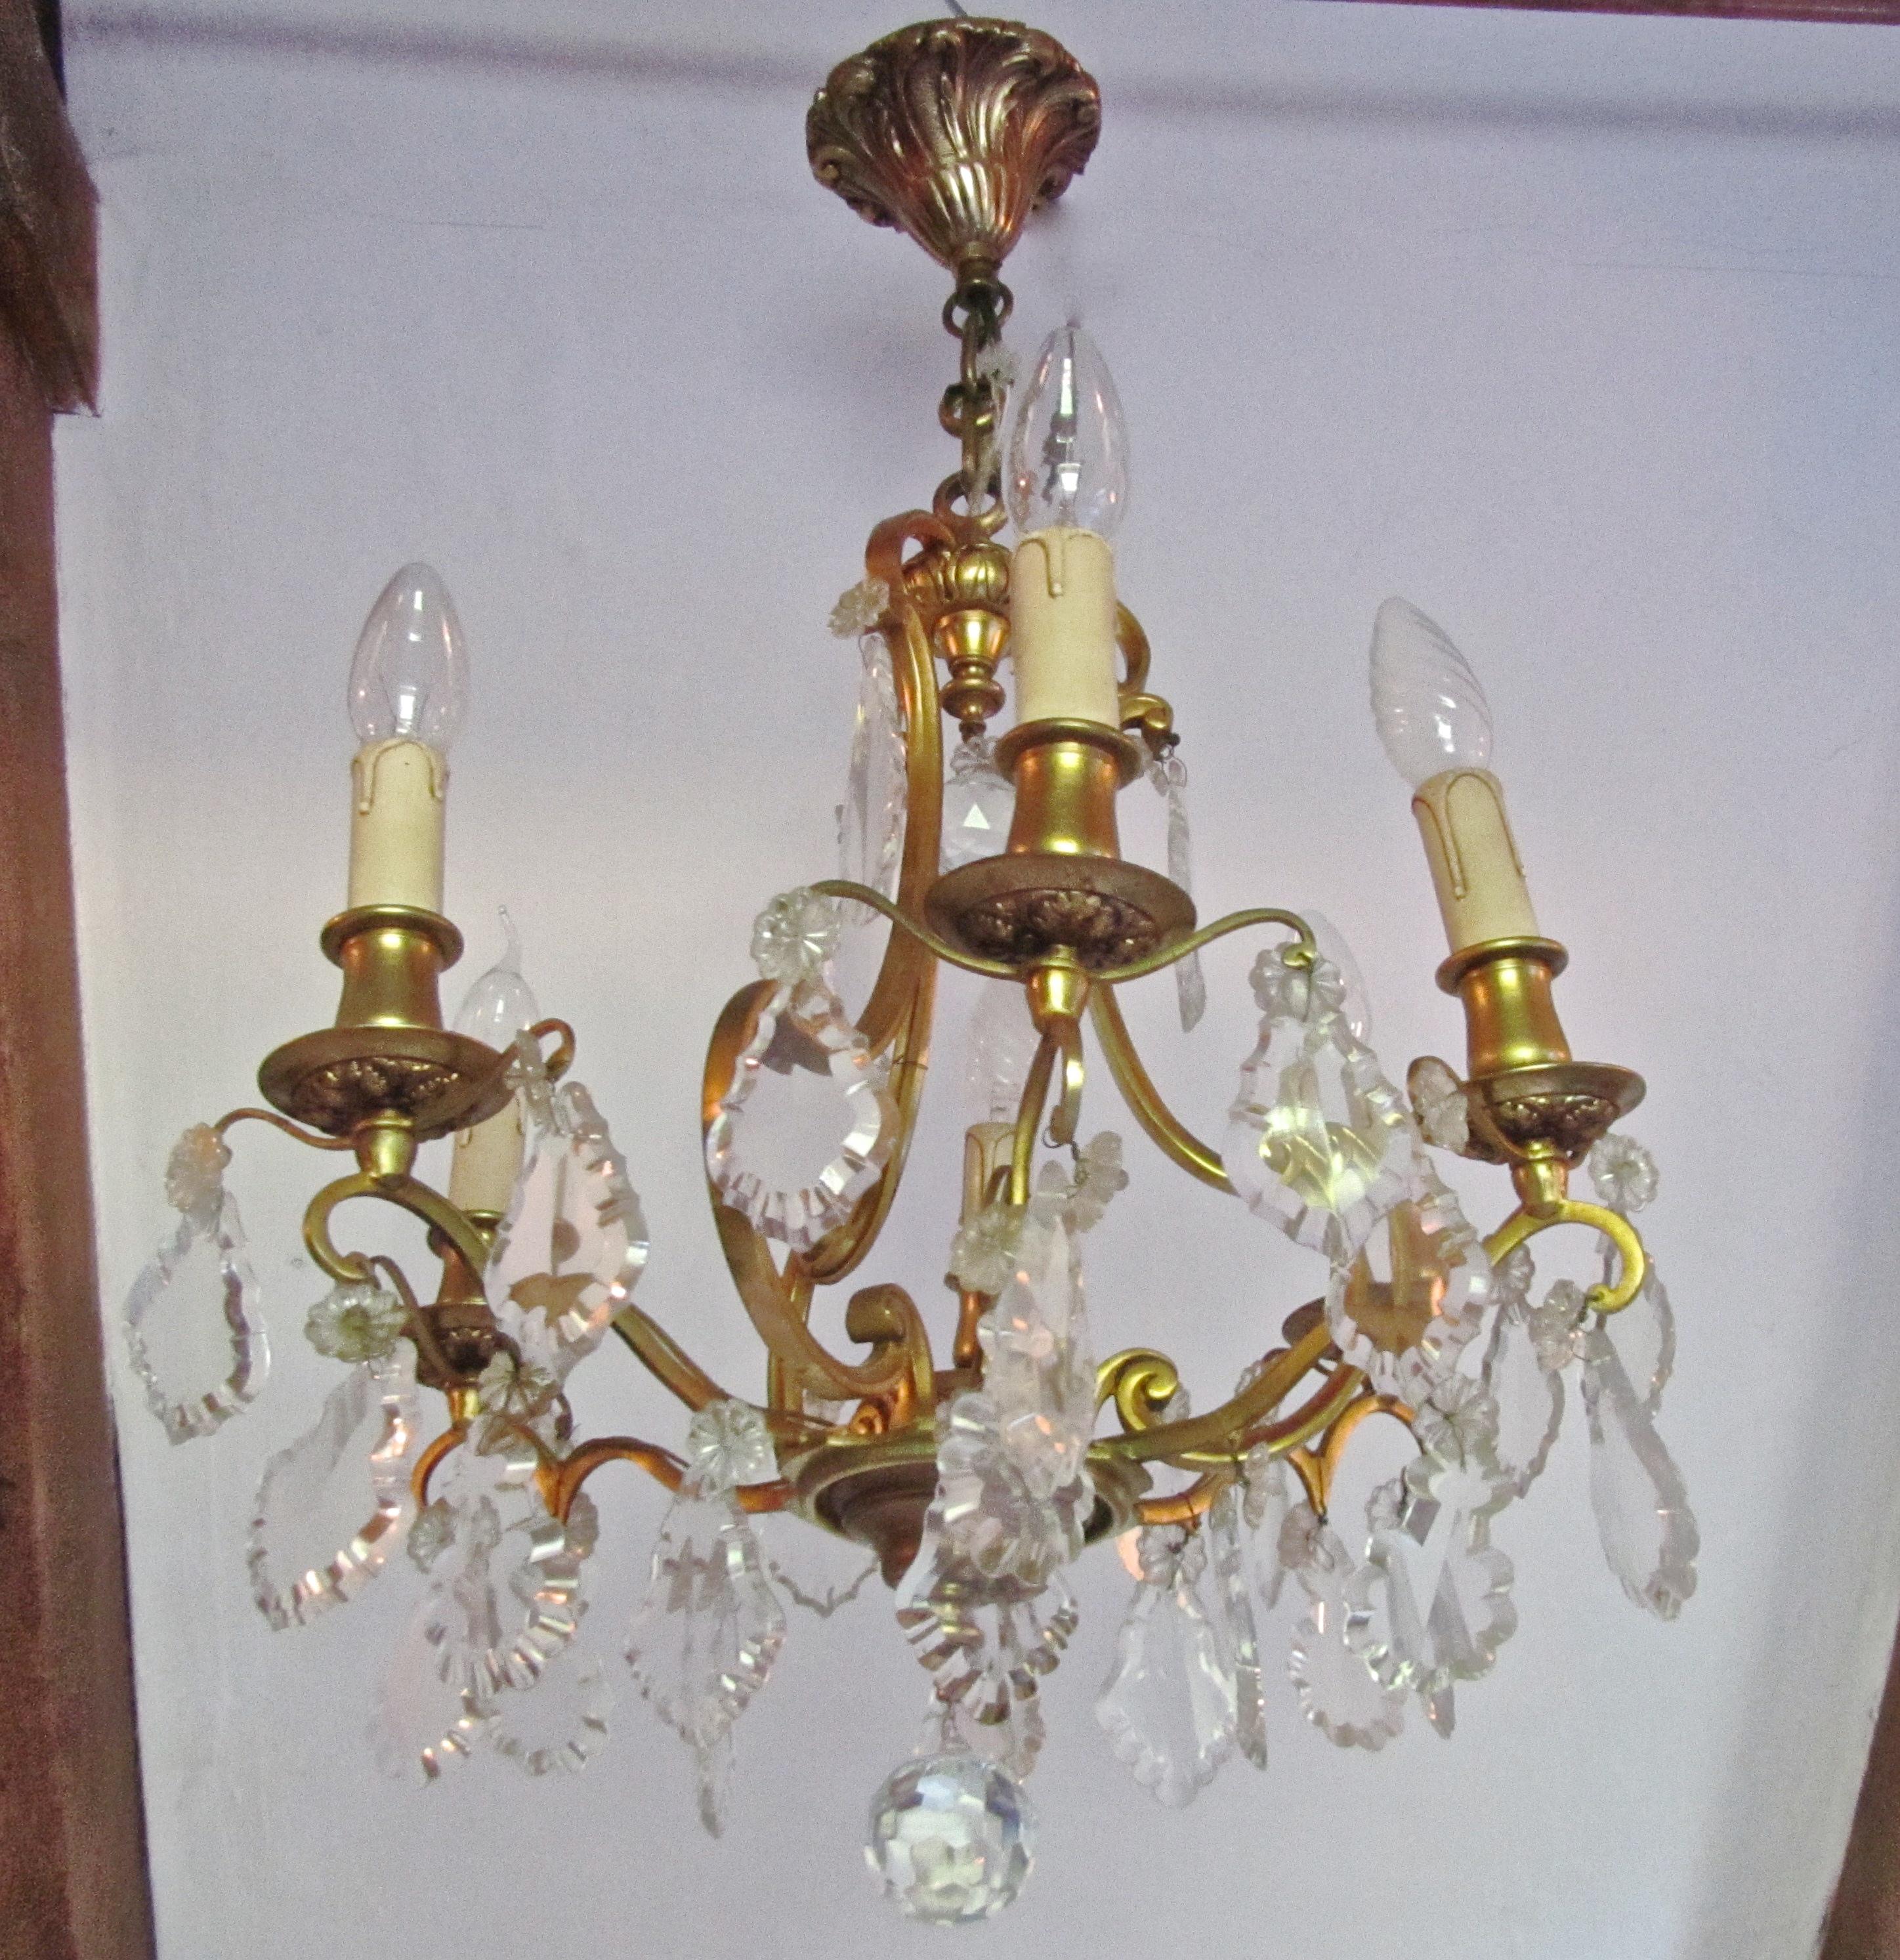 A charming French cut glass and brass 6 branch chandelier

This is an excellent quality and very dainty piece, the brass has a gilded finish and the 6 arms are hung with faceted glass tear drop pendants and tiny rosettes it has an attractive